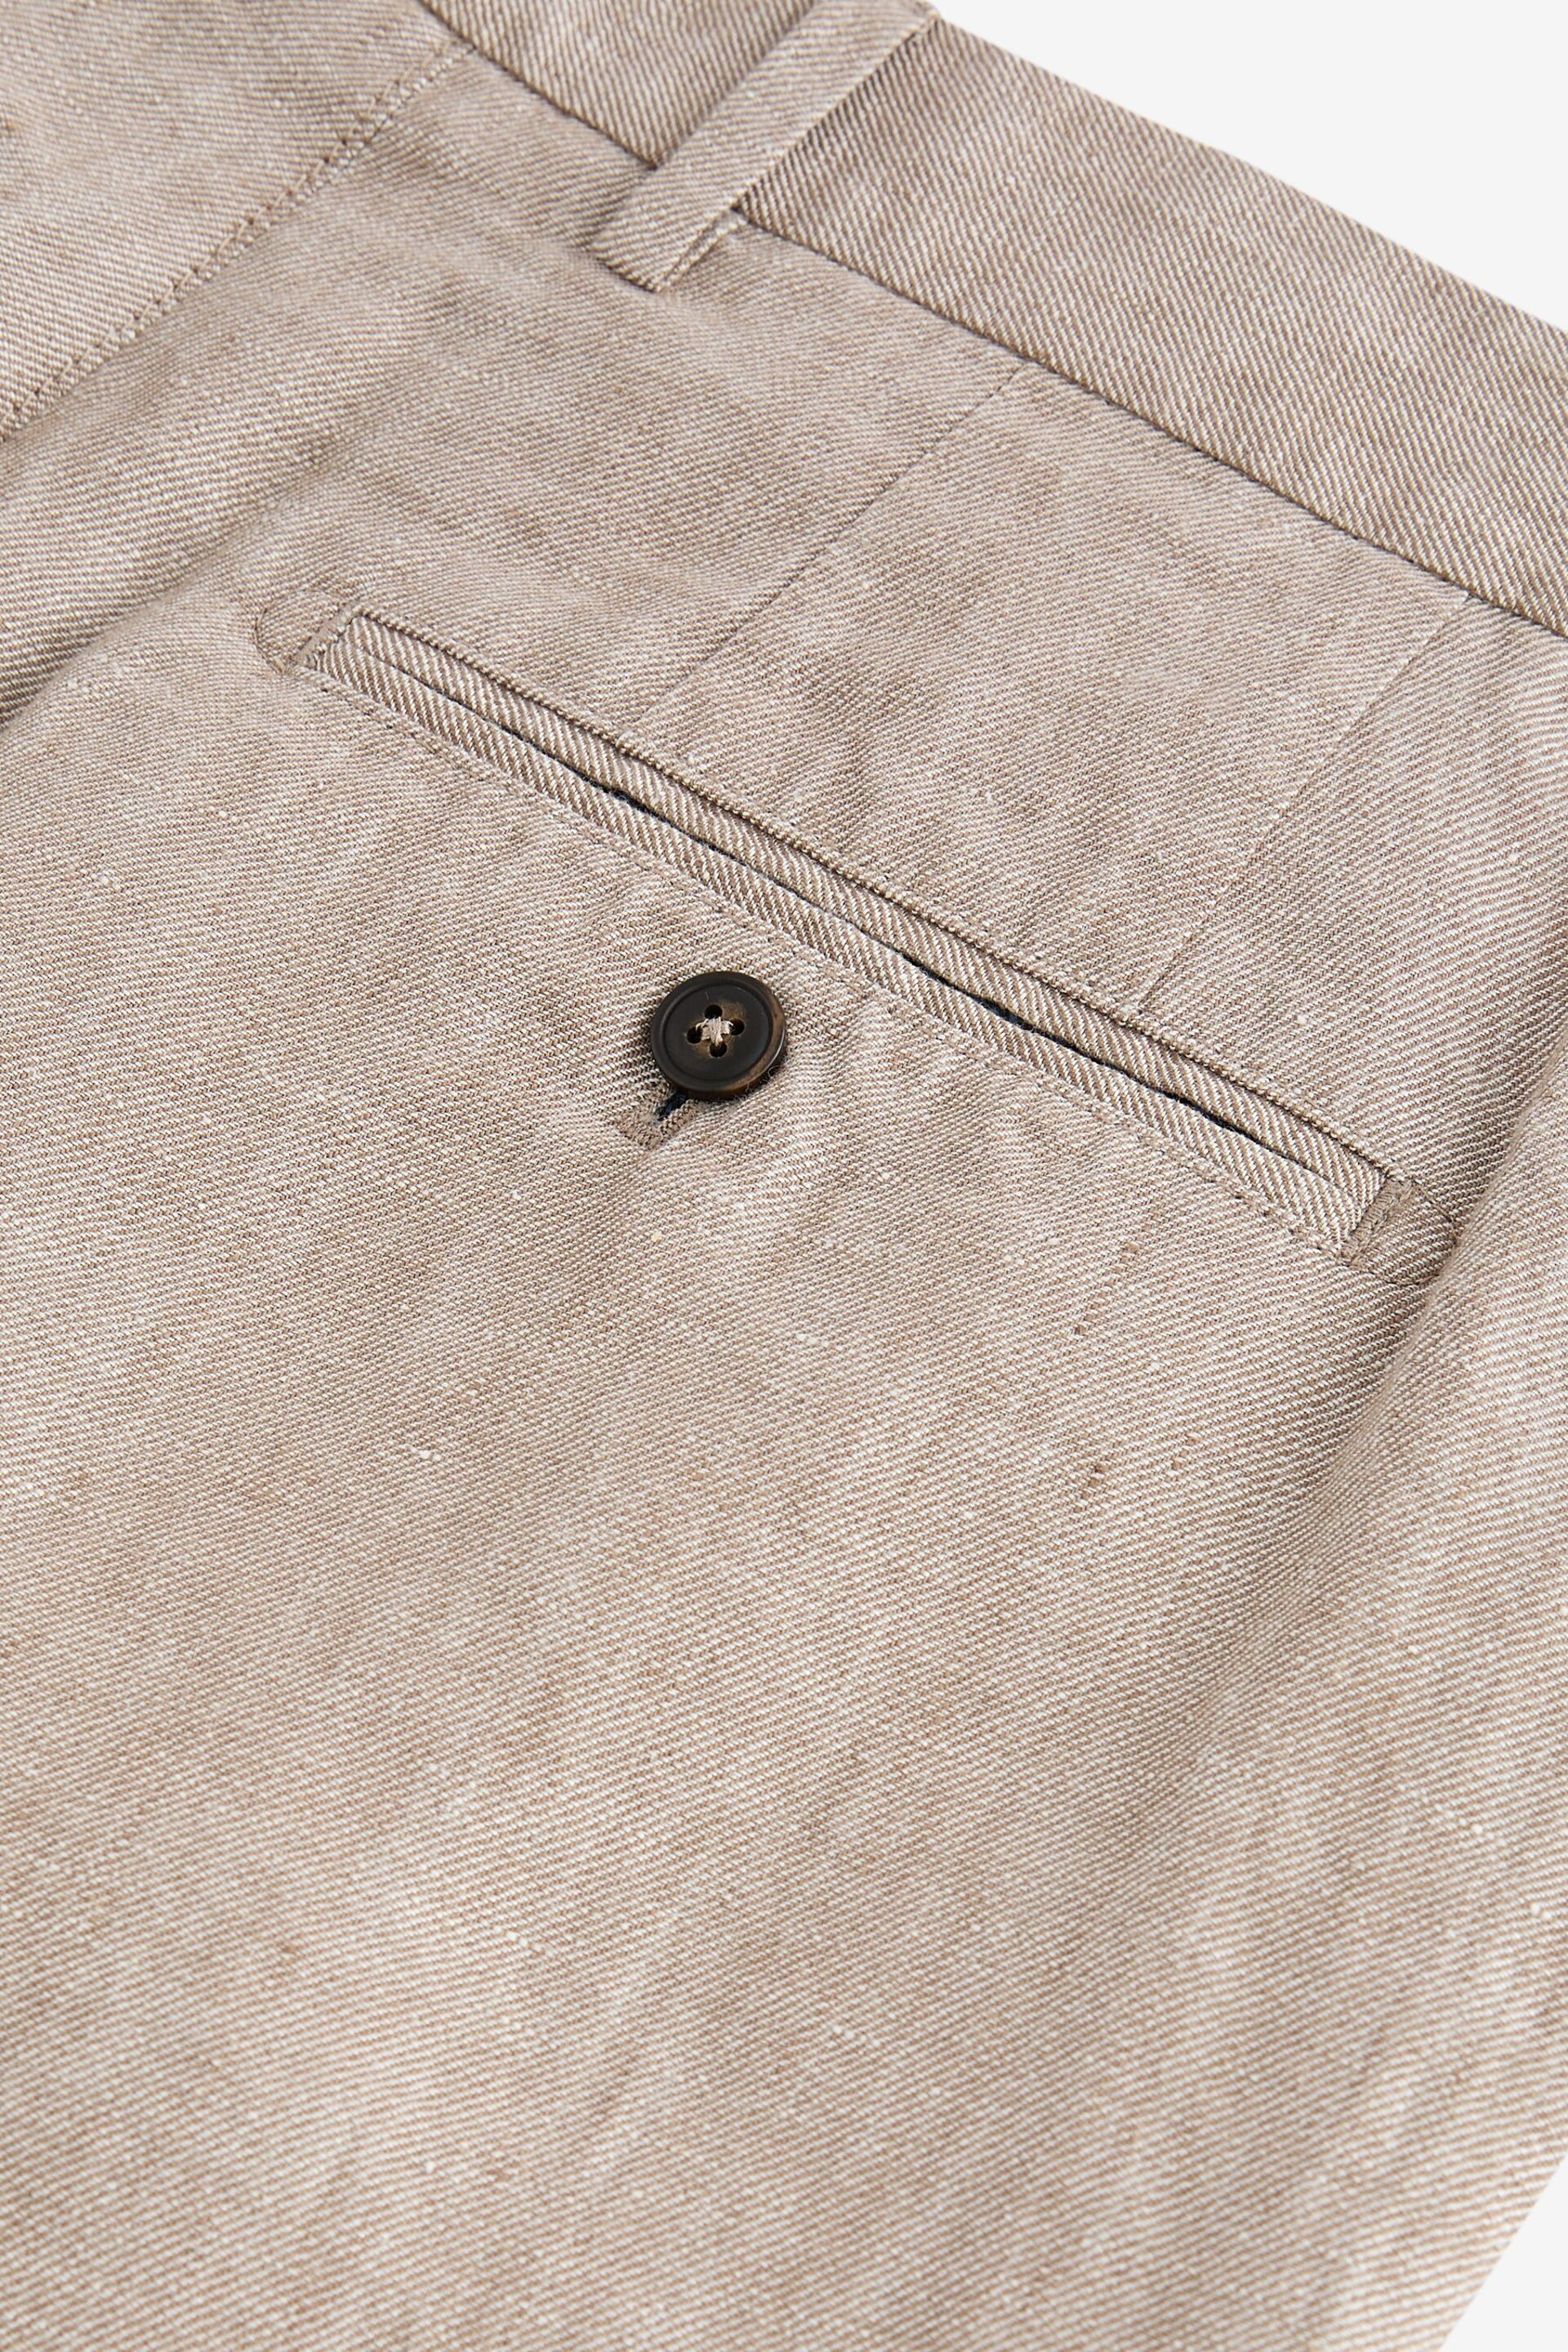 Sand Linen Luxe Shorts - Image 7 of 9